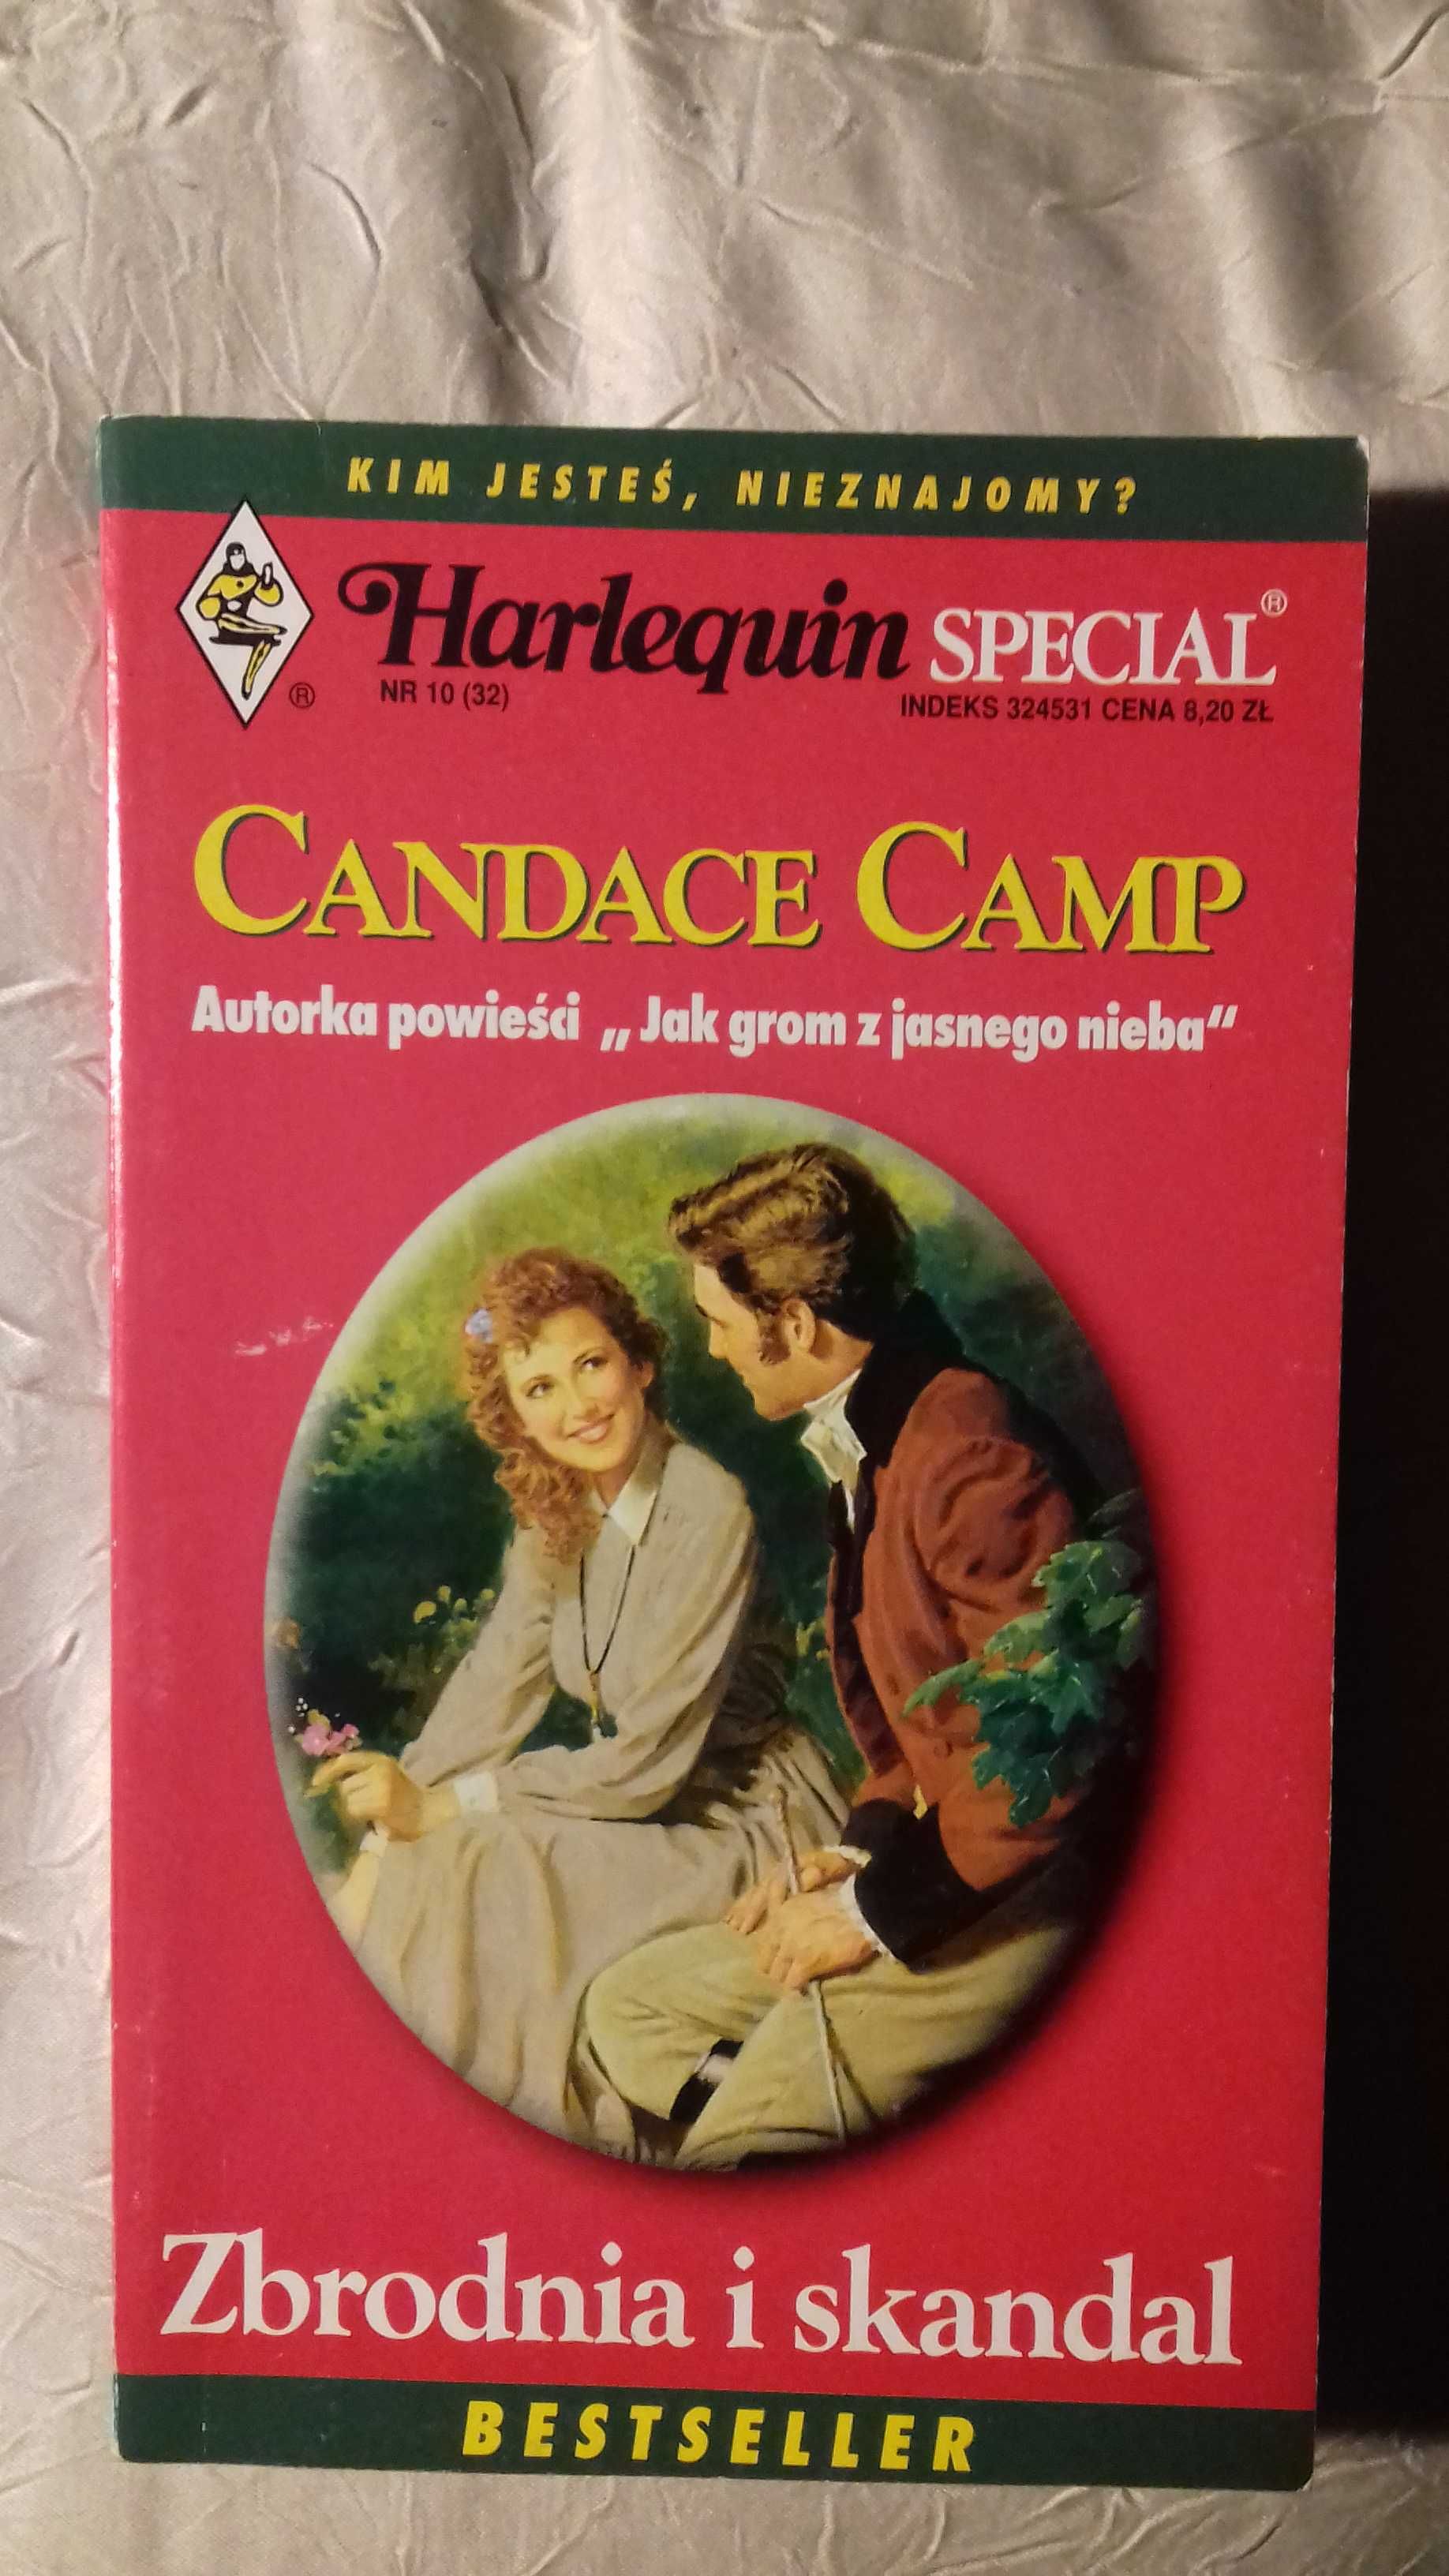 ZBRODNIA I SKANDAL - Candace Camp Harlequin Special Romans Bestseller